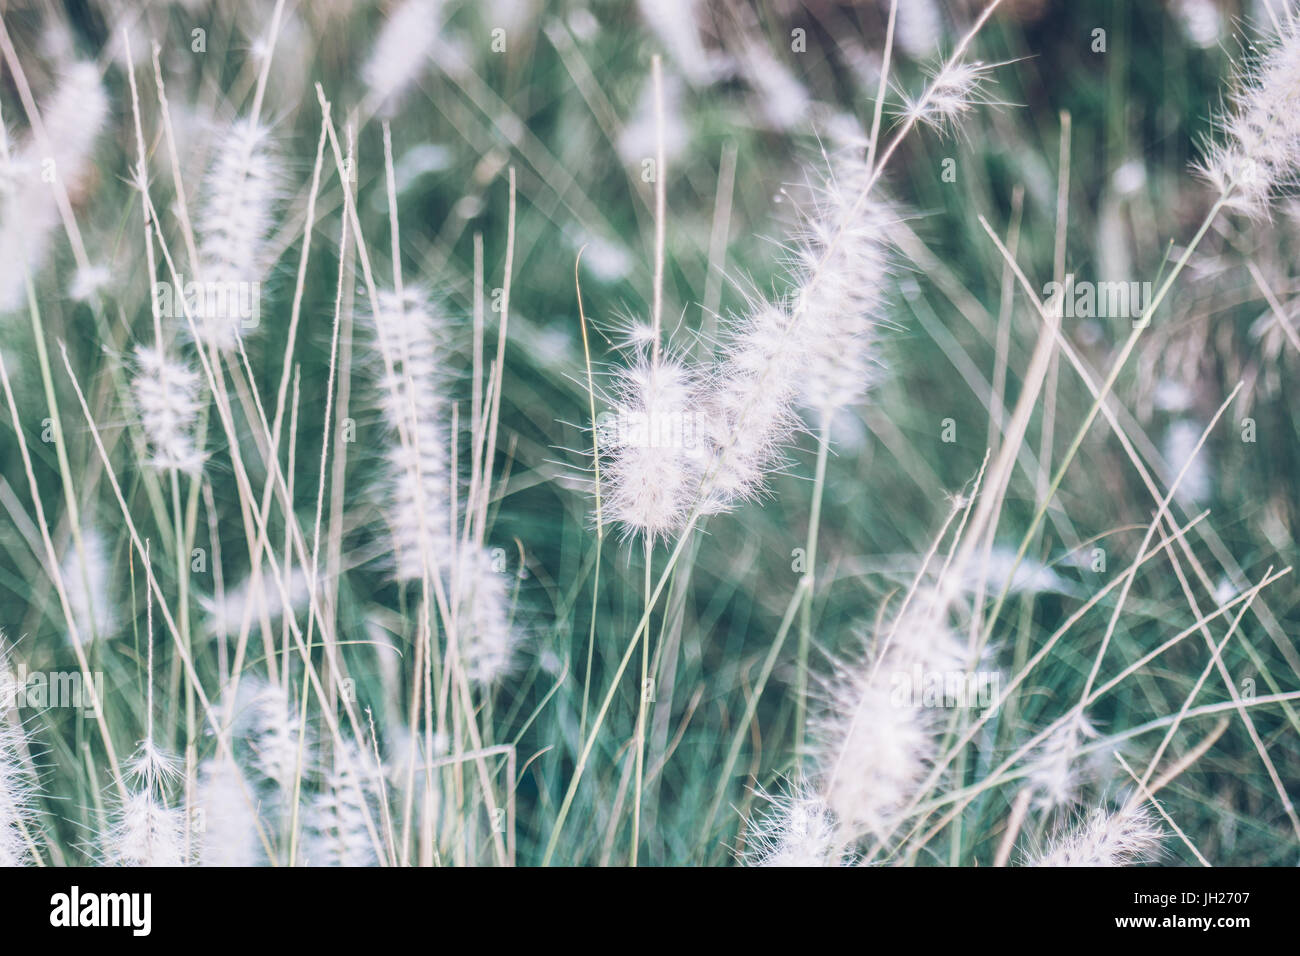 Fountain grass or pennisetum setaceum closeup in a cold blue color Stock Photo